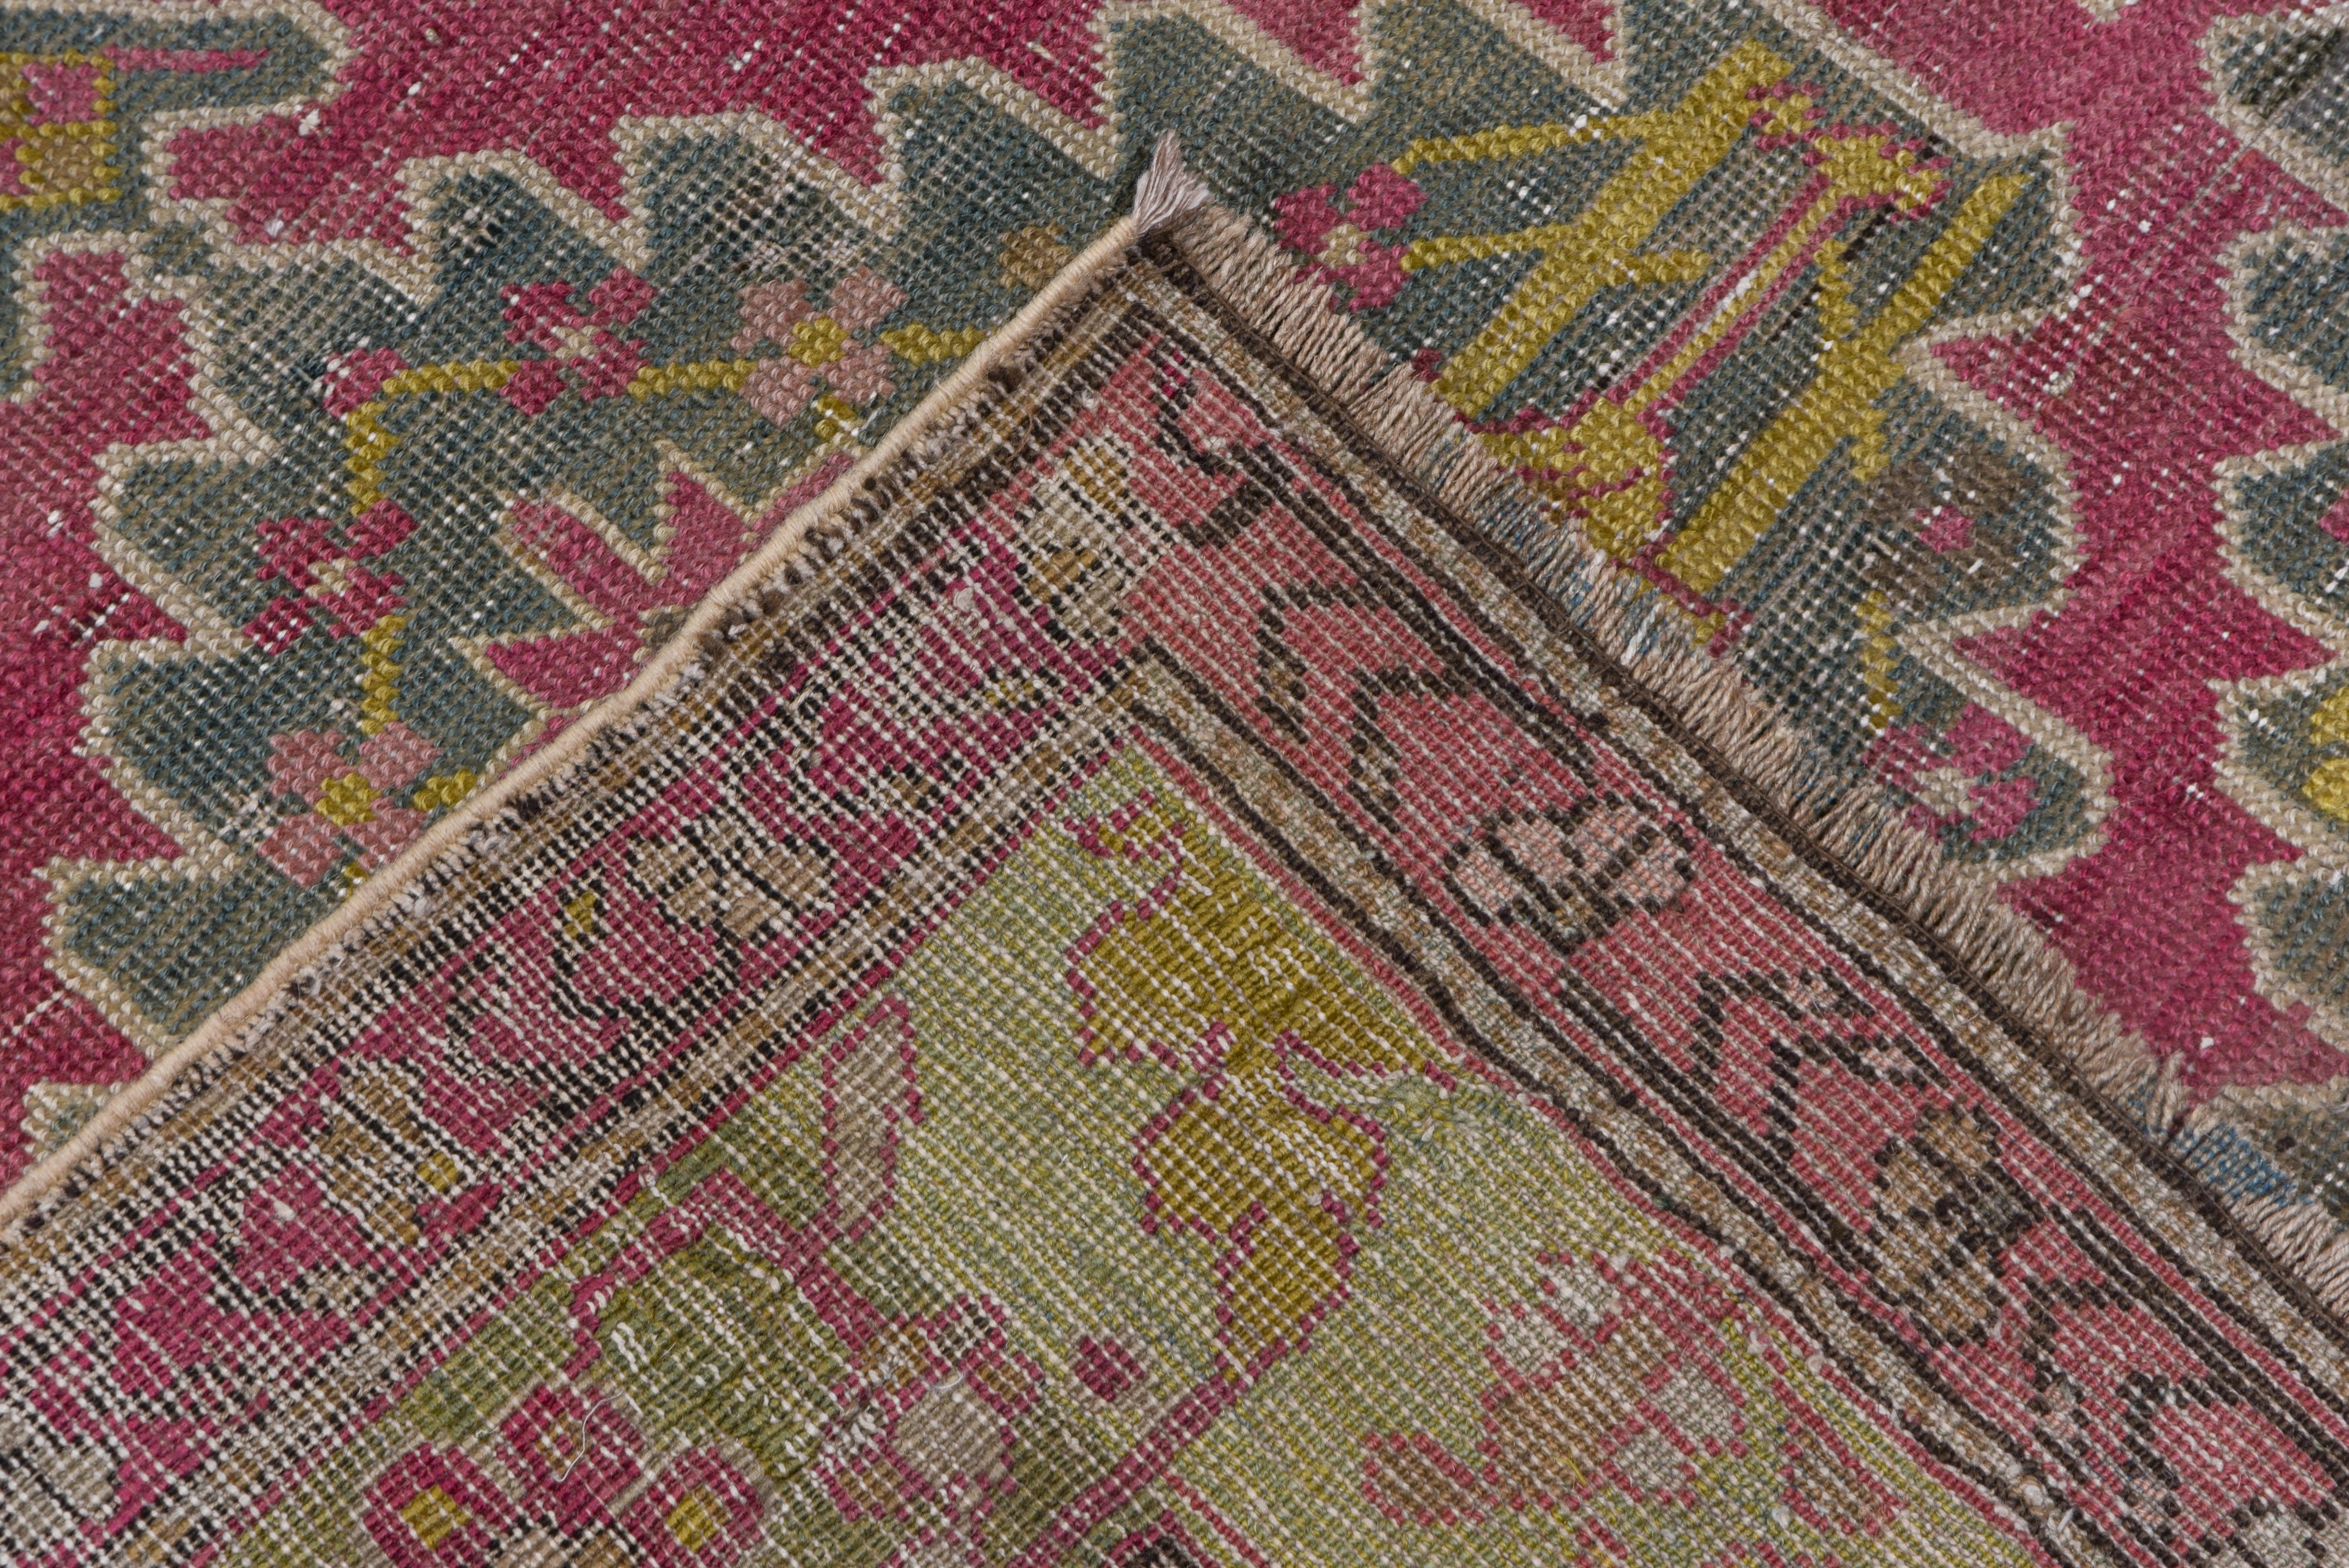 This runner has a cochineal red field that features nine notched lozenges joined into a central long pole medallion, all with cruciform centers and en suite side filler triangles, in the so-called 